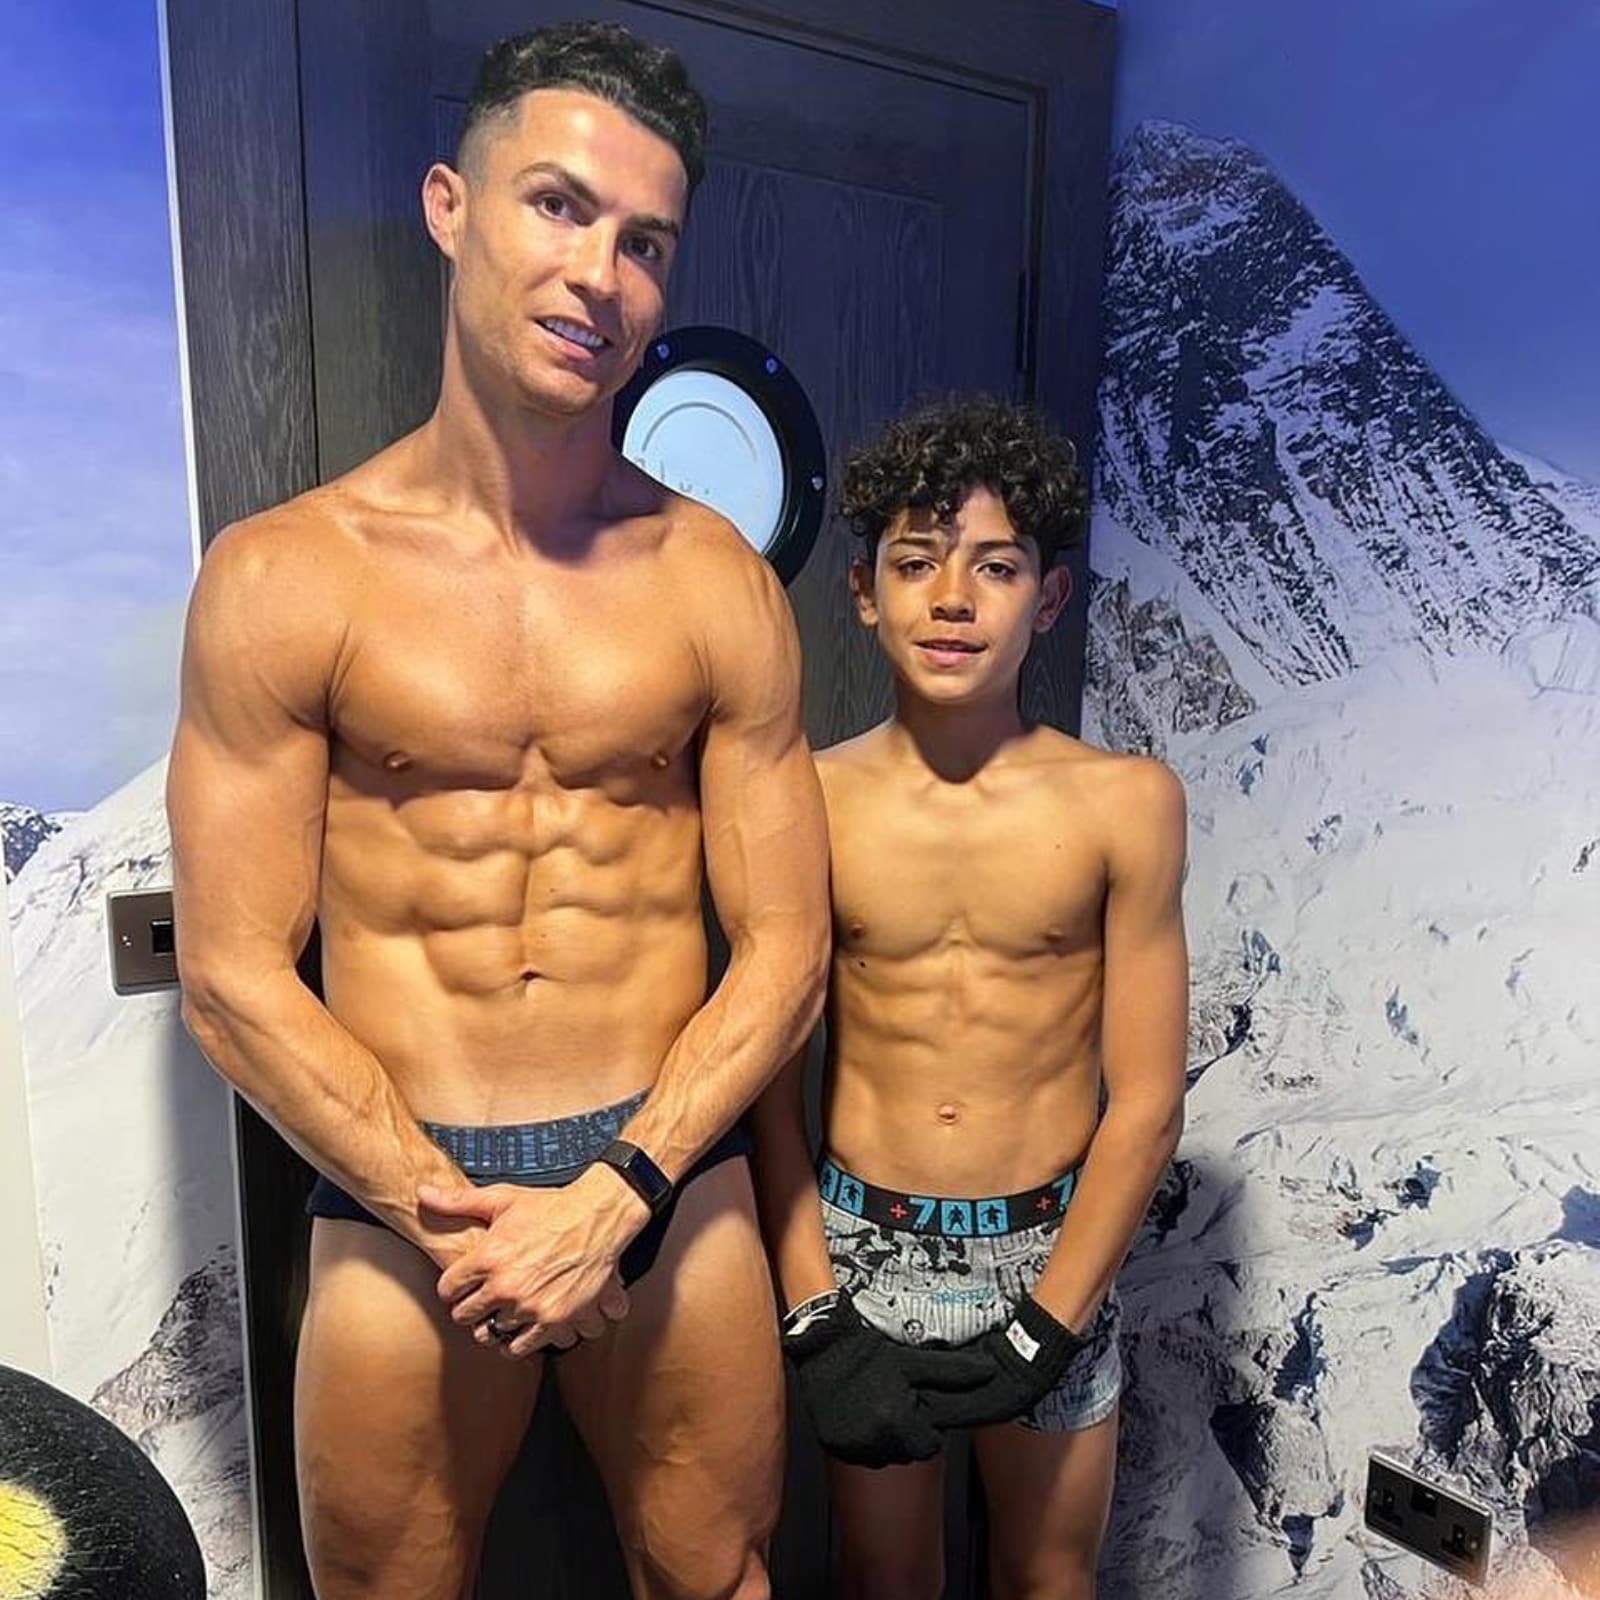 Cristiano Ronaldo And His Son Flaunt Shredded Abs in a Viral Shirtless  Picture on Instagram